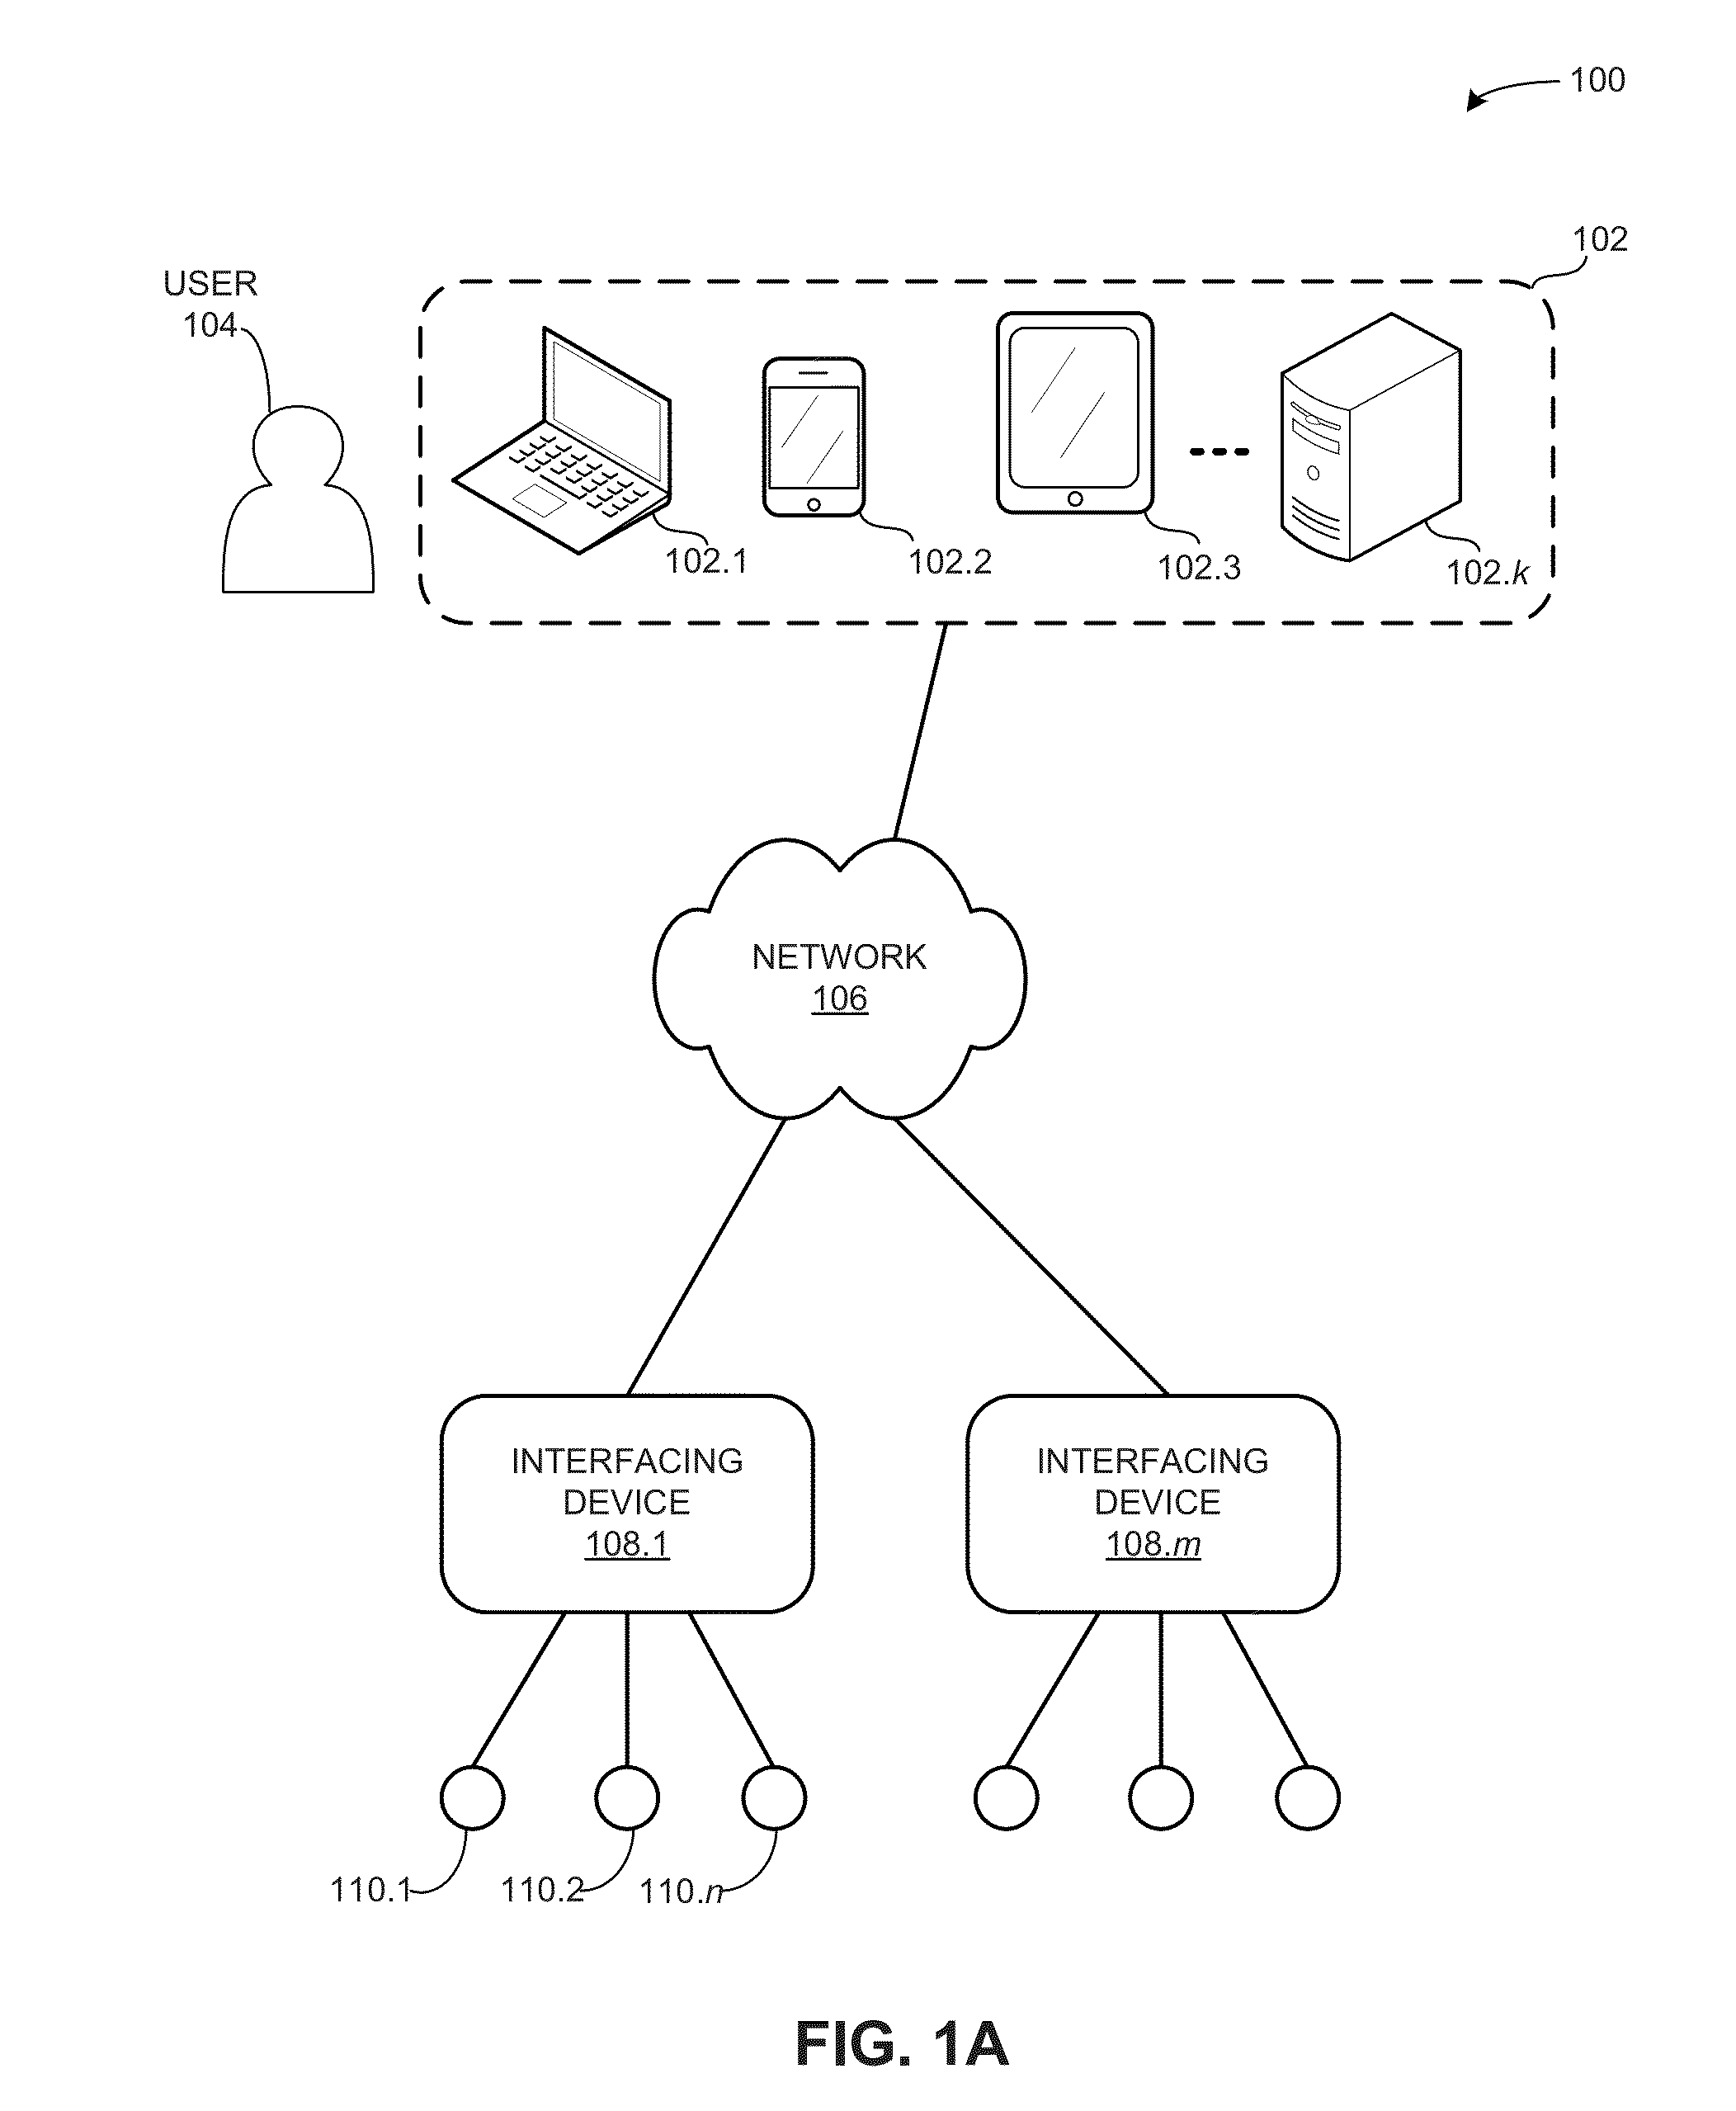 Method and apparatus for monitoring and processing sensor data from an electrical outlet